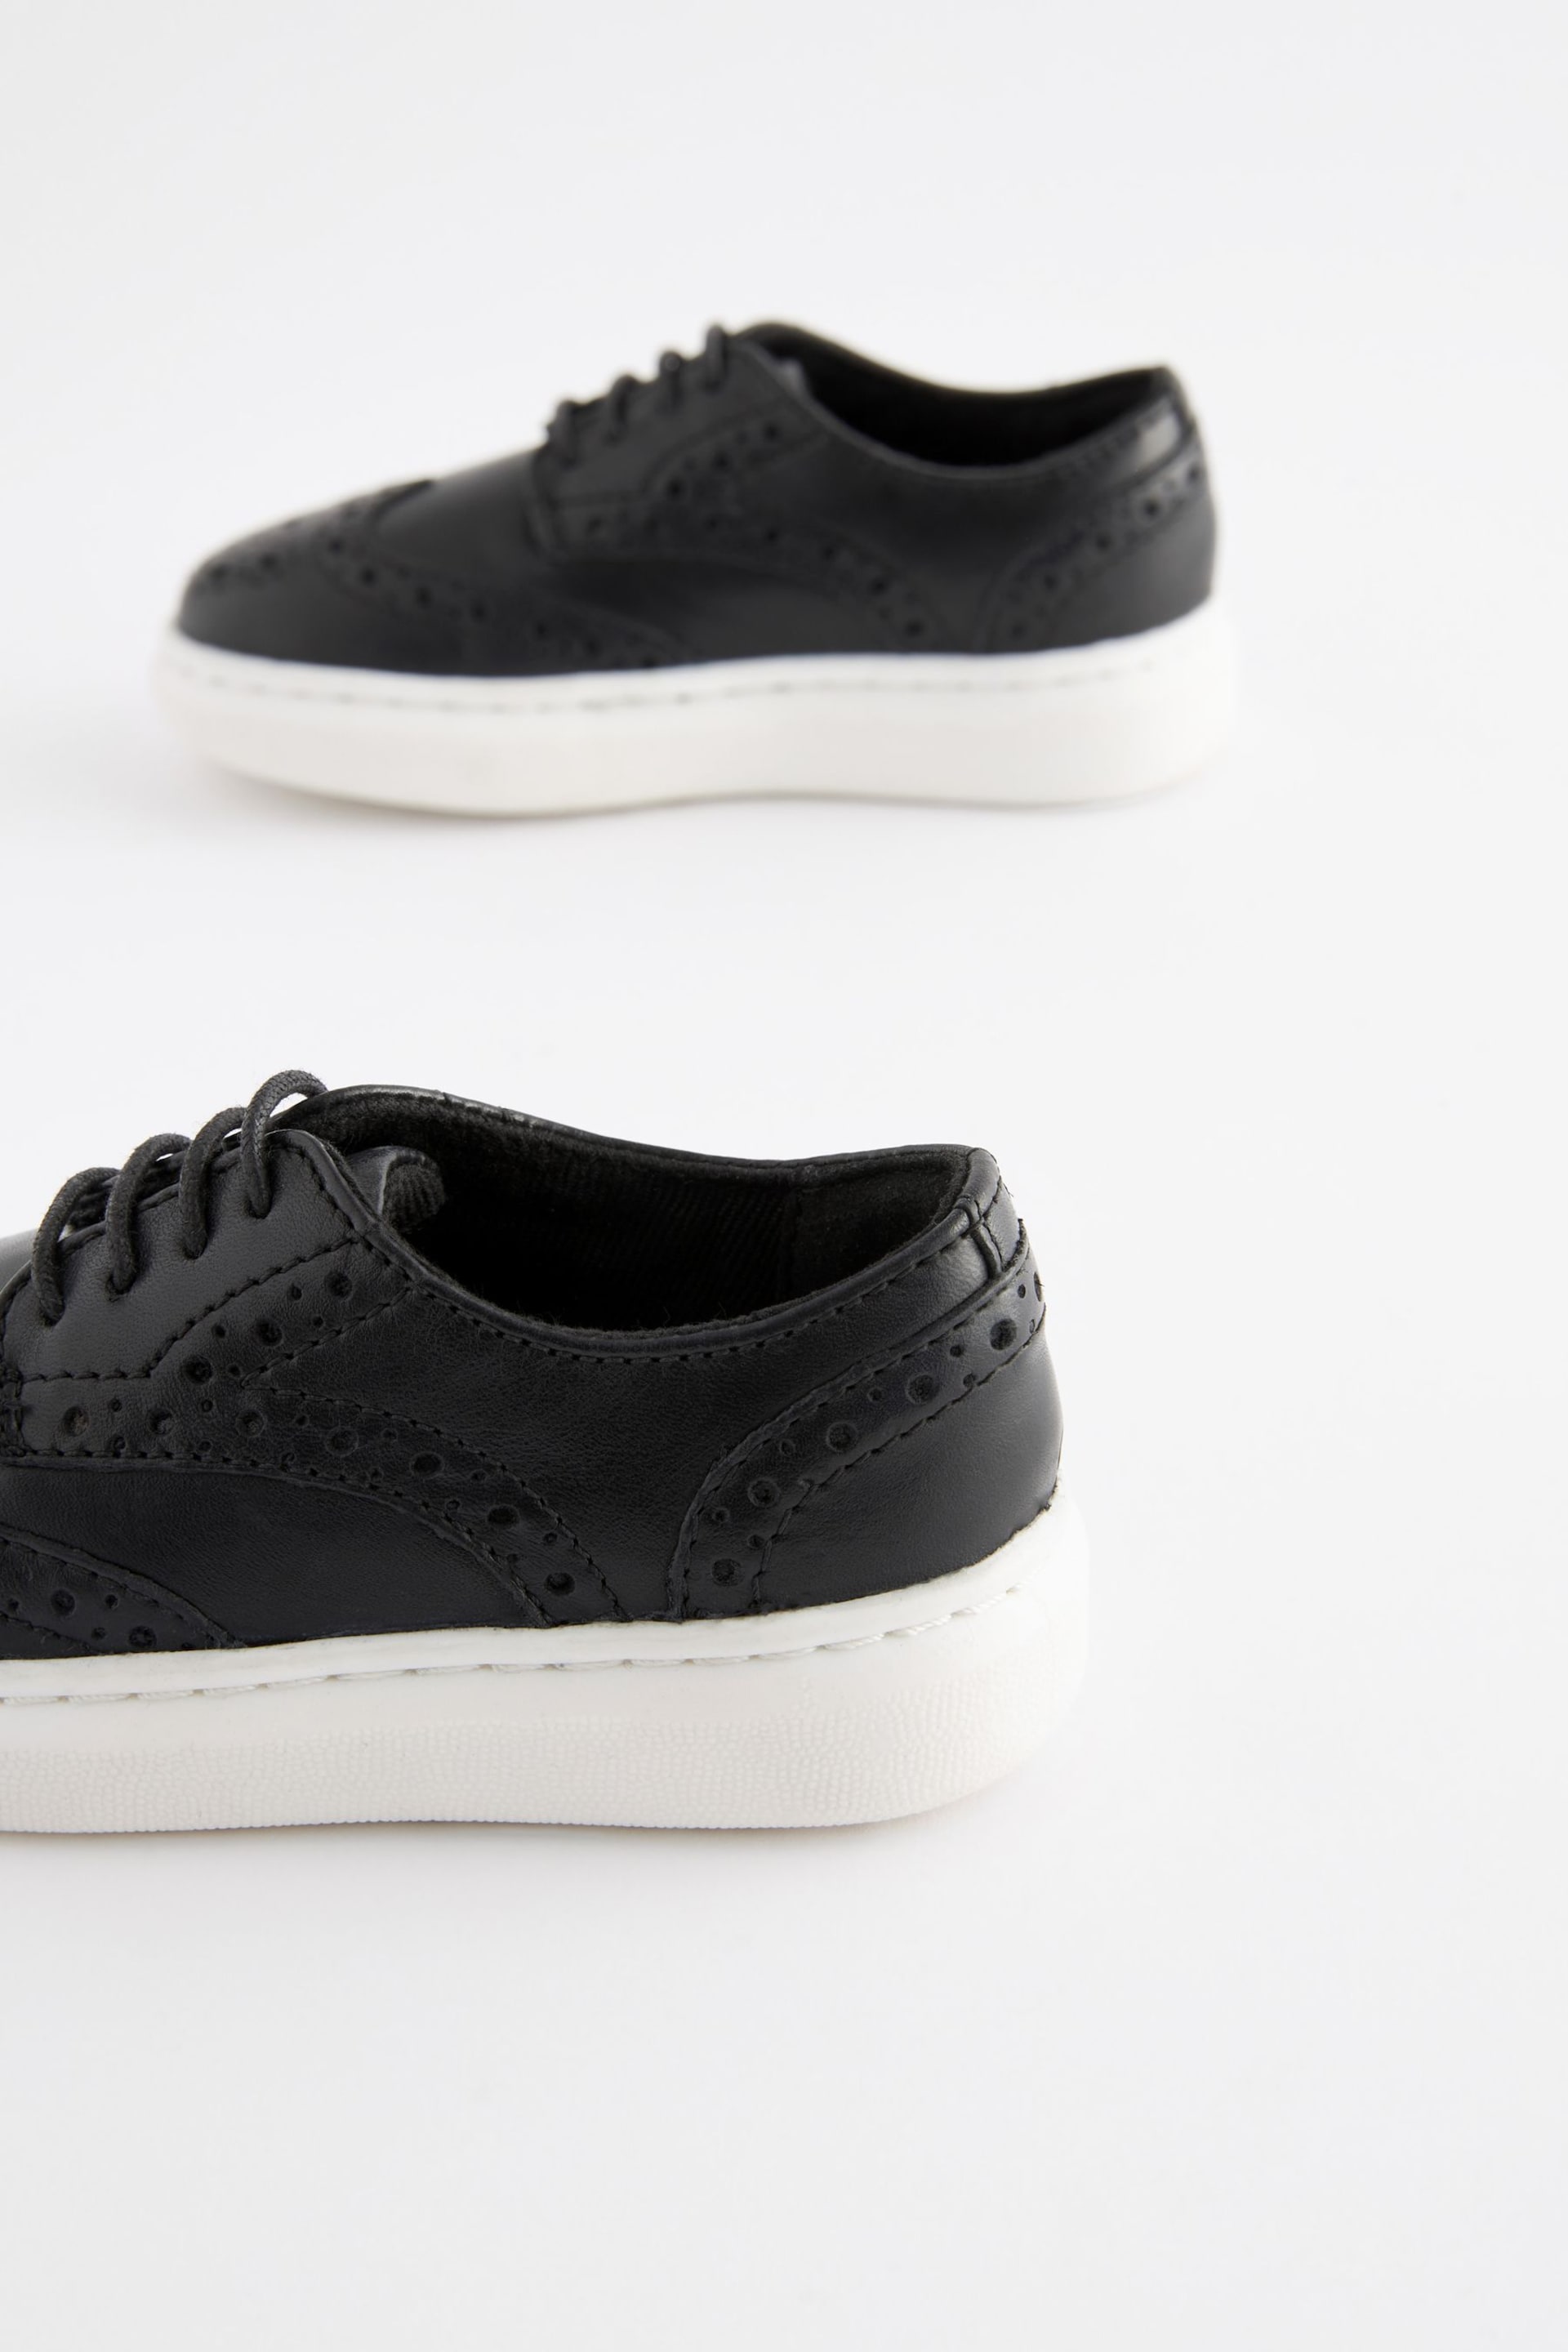 Black Brogue Smart Leather Lace-Up Shoes - Image 5 of 6